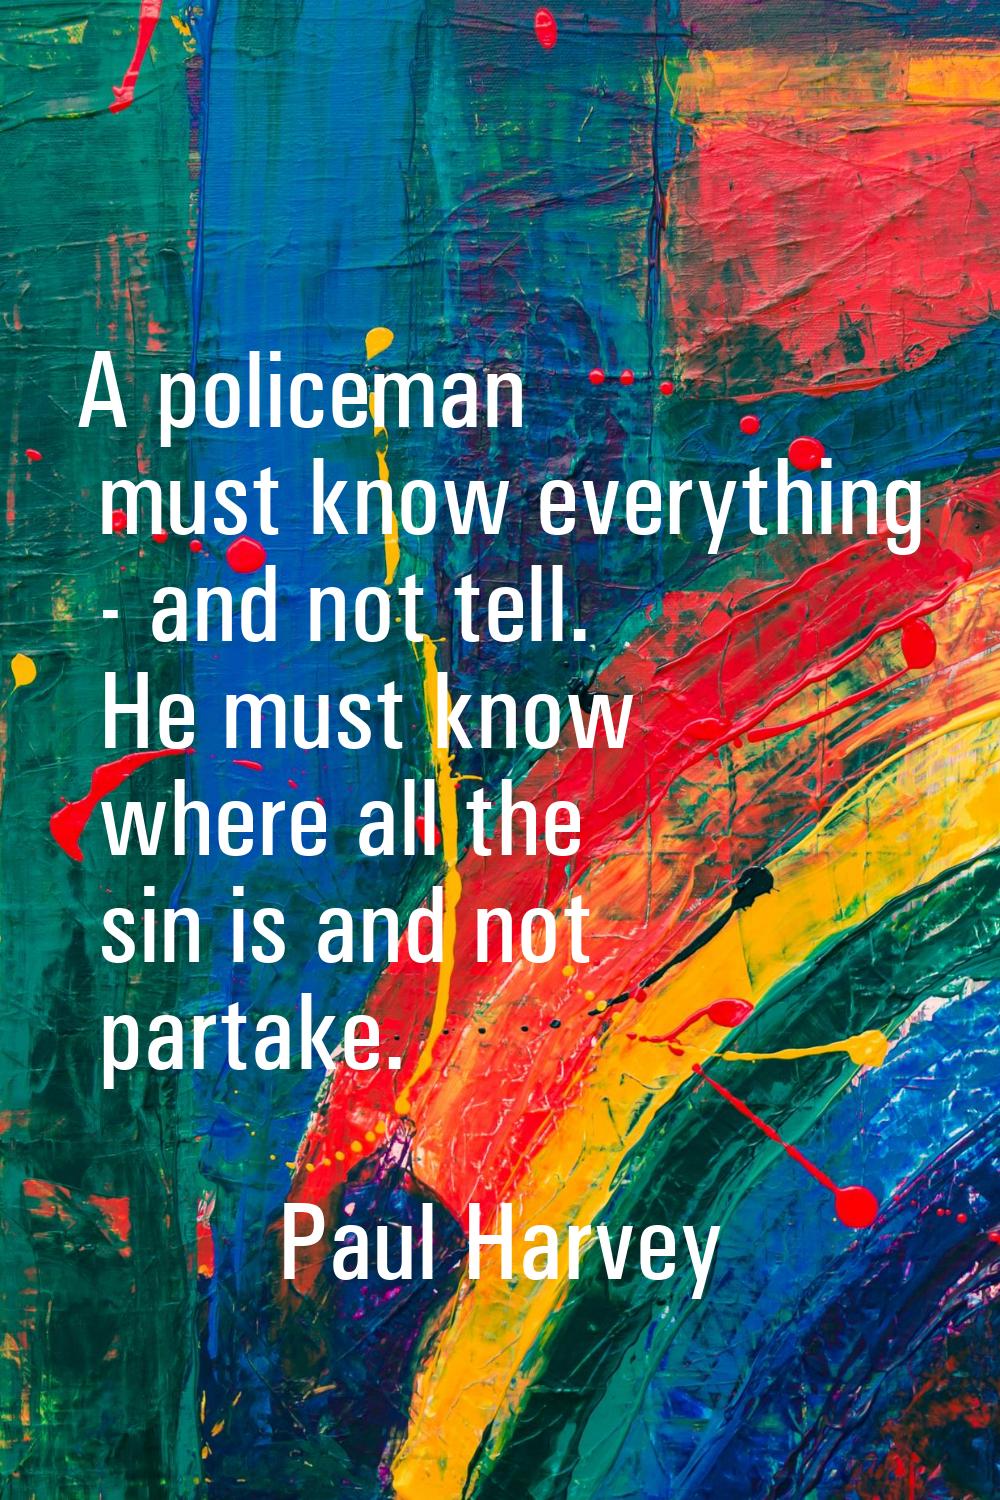 A policeman must know everything - and not tell. He must know where all the sin is and not partake.